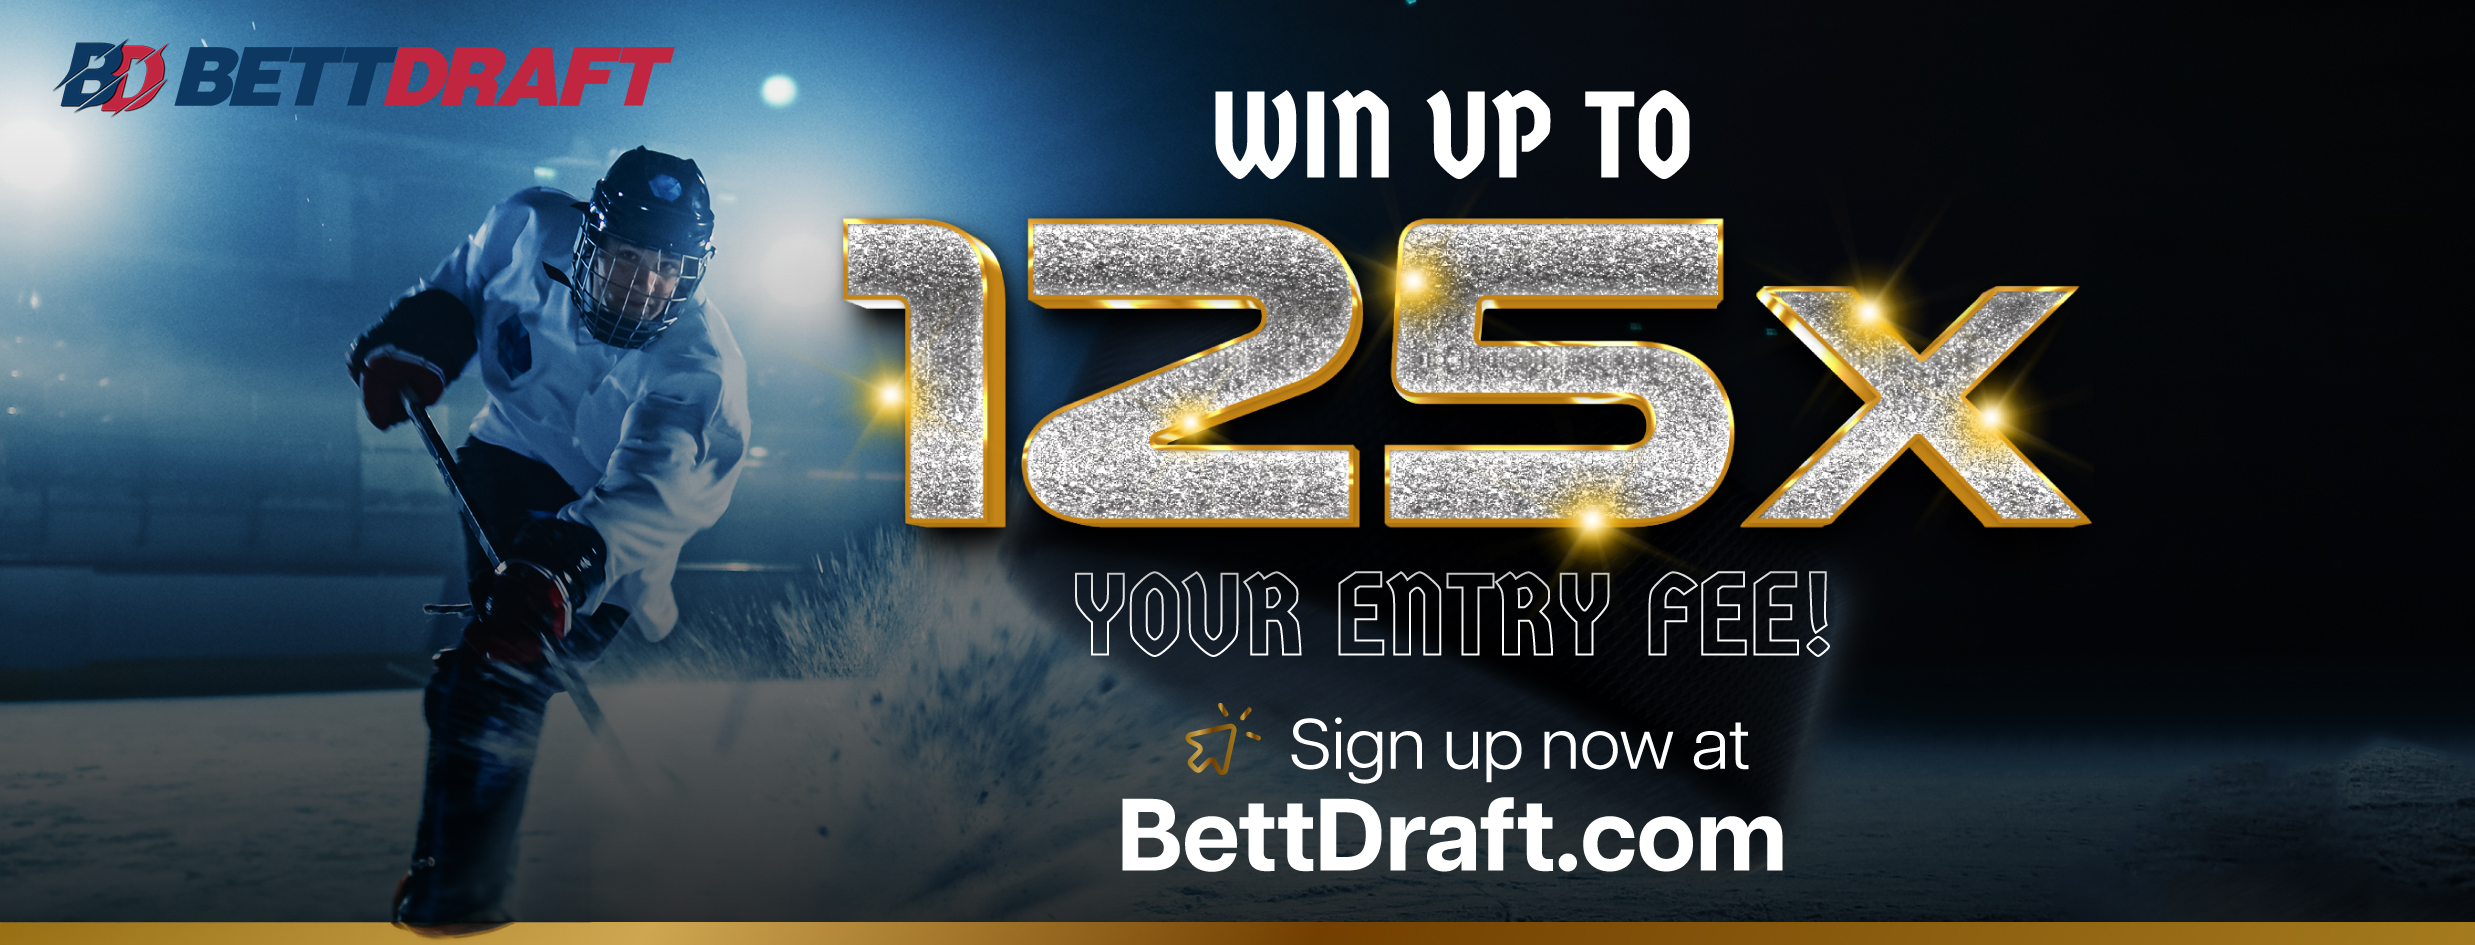 Win up to 125X your entry fee with BettDraft